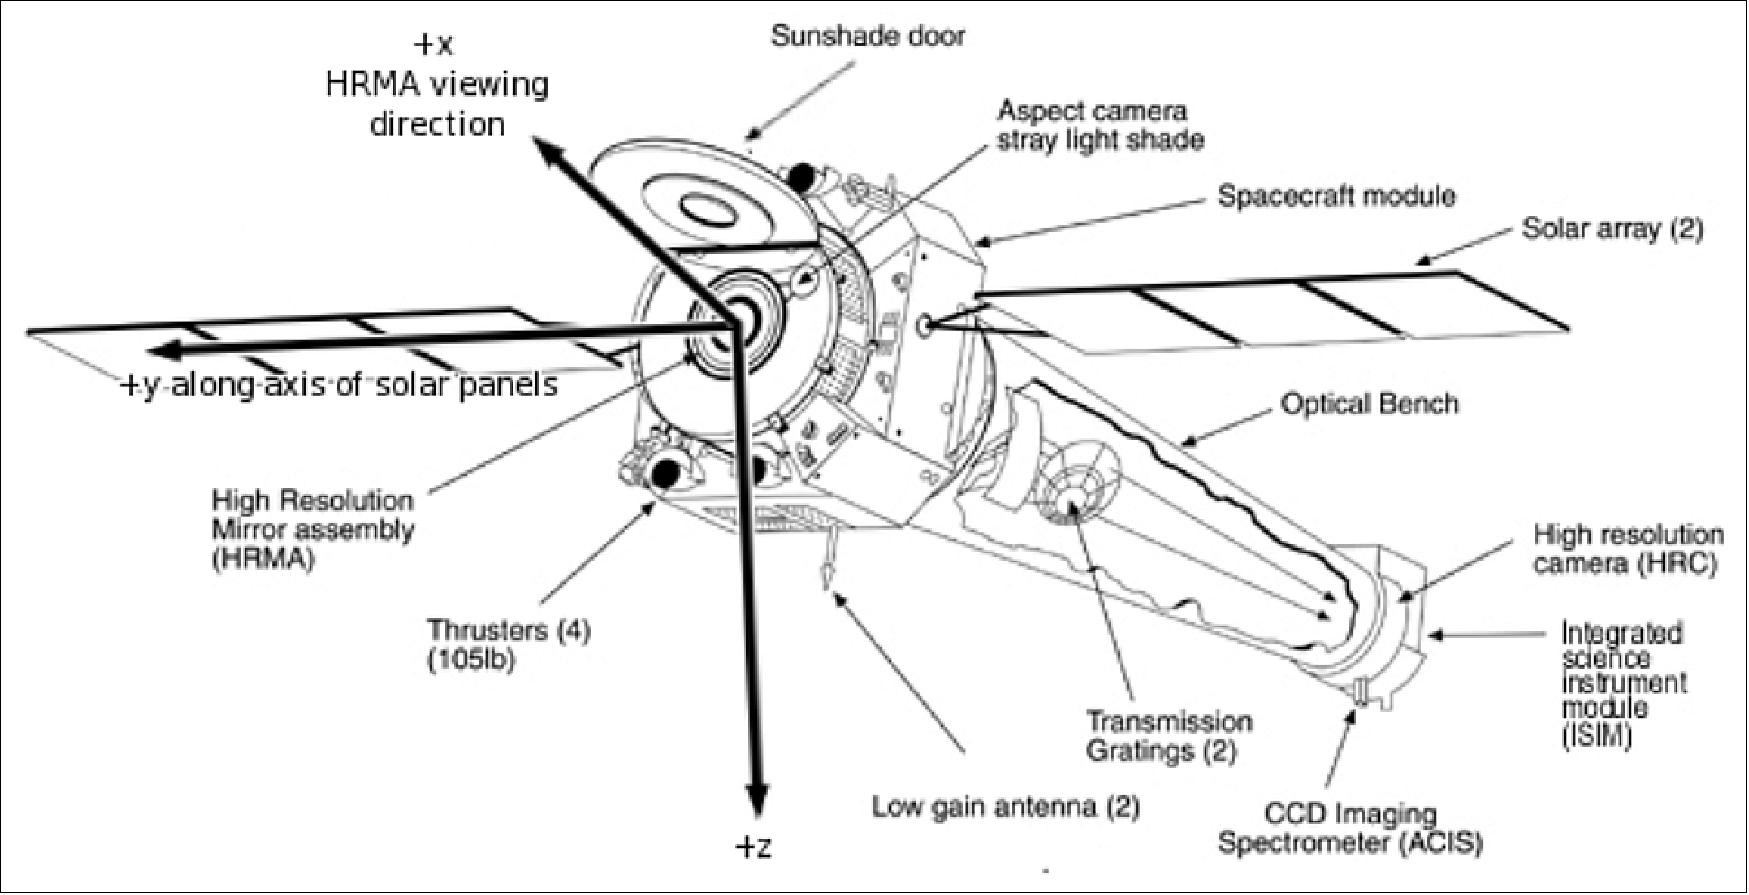 Figure 6: Illustration of the Chandra spacecraft, its main elements and its instruments (image credit: NASA)